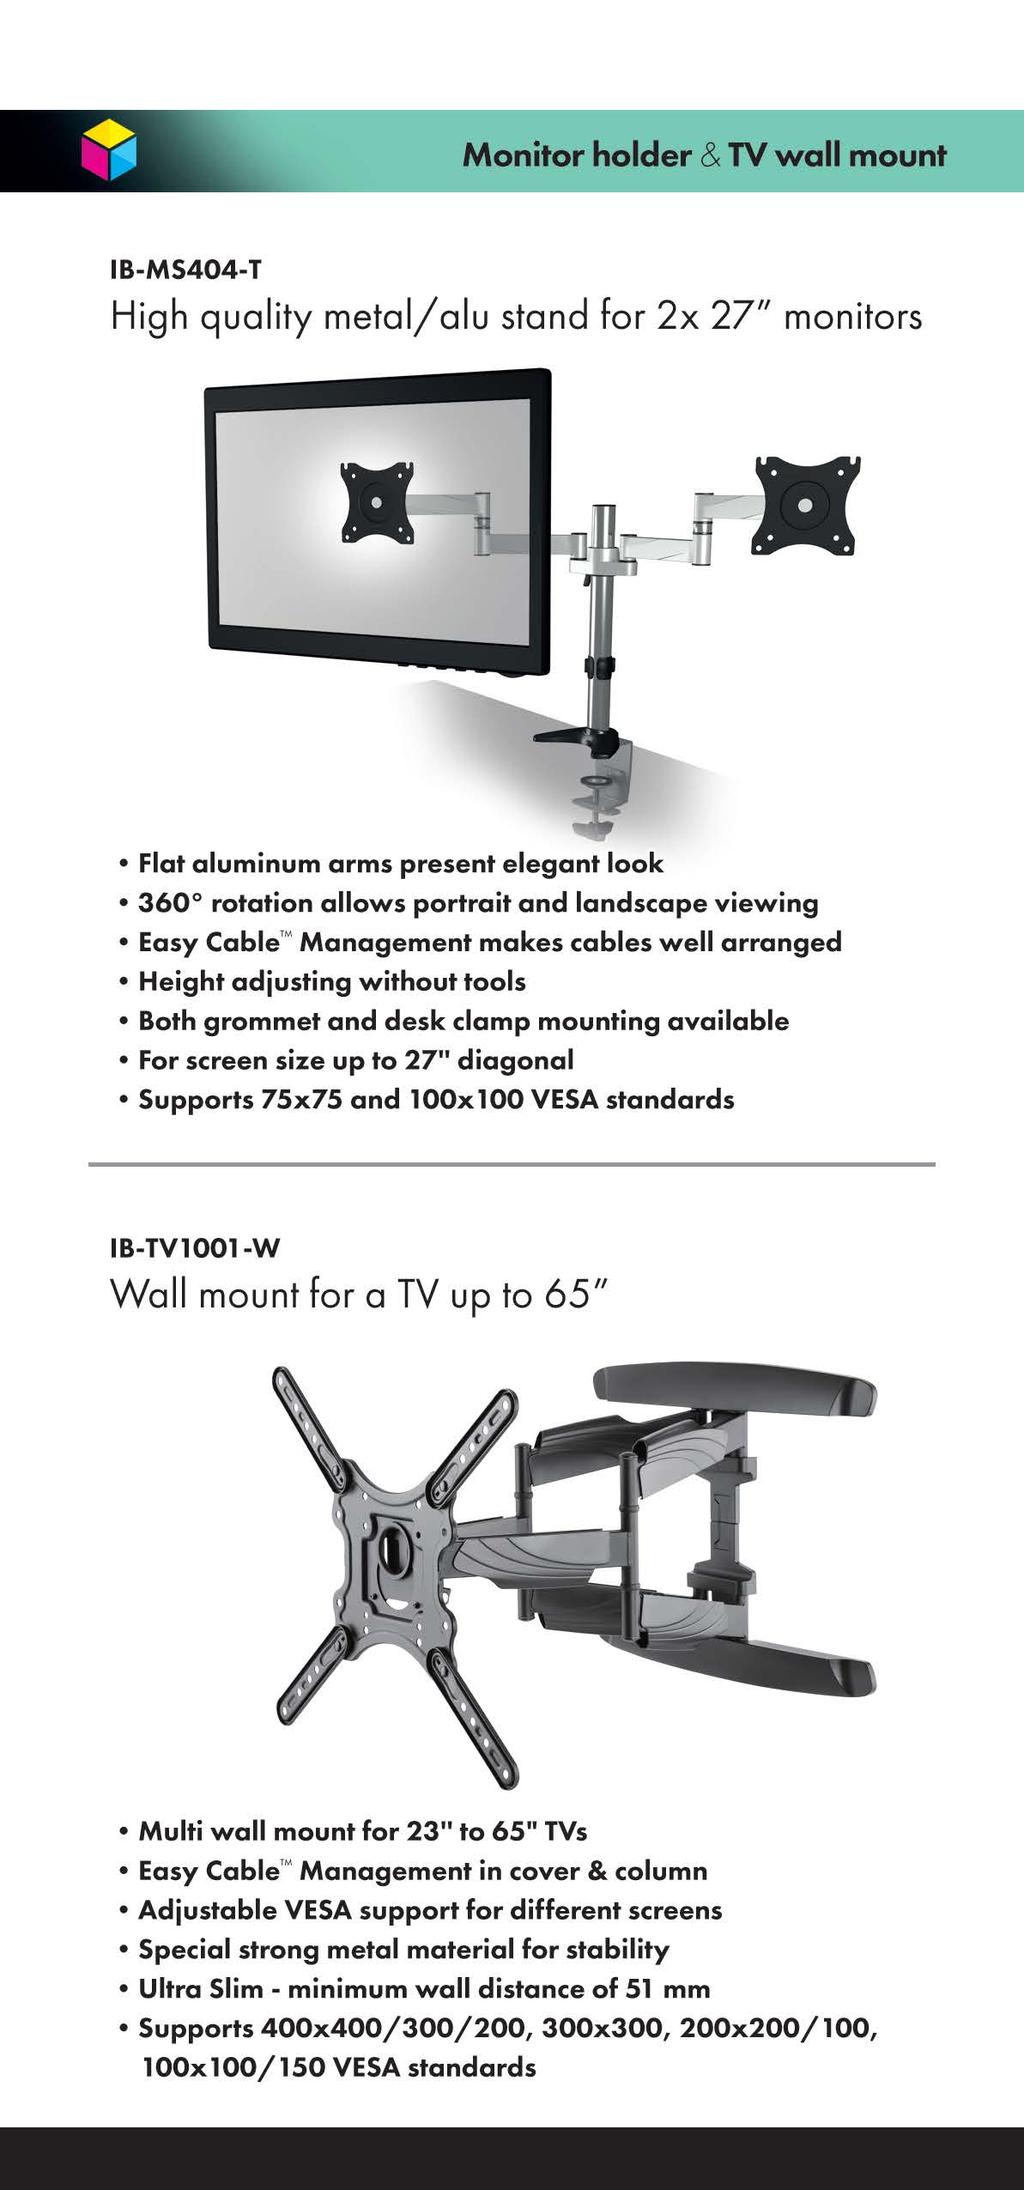 Monitor holder & TV wall mount 1B-MS404-T High quality metal/ alu stand for 2x 27" monitors Flat aluminum arms present elegant laak 360 rotation allows portrait and landscape viewing Easy Cable'"